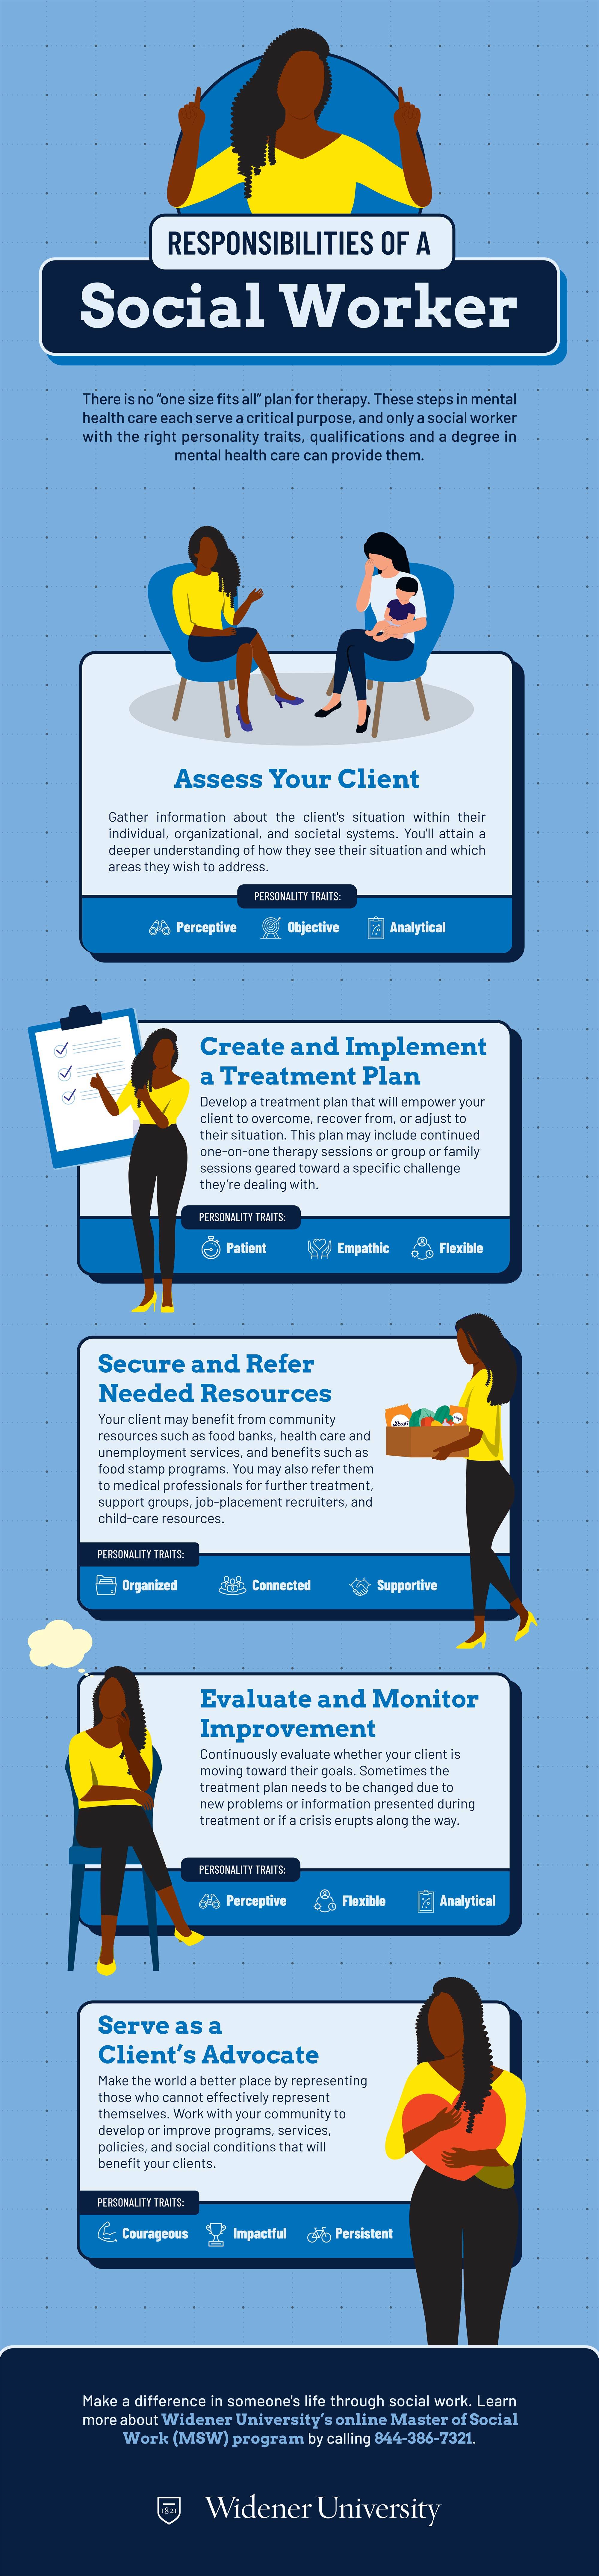 Responsibilities of a Social Worker full infographic